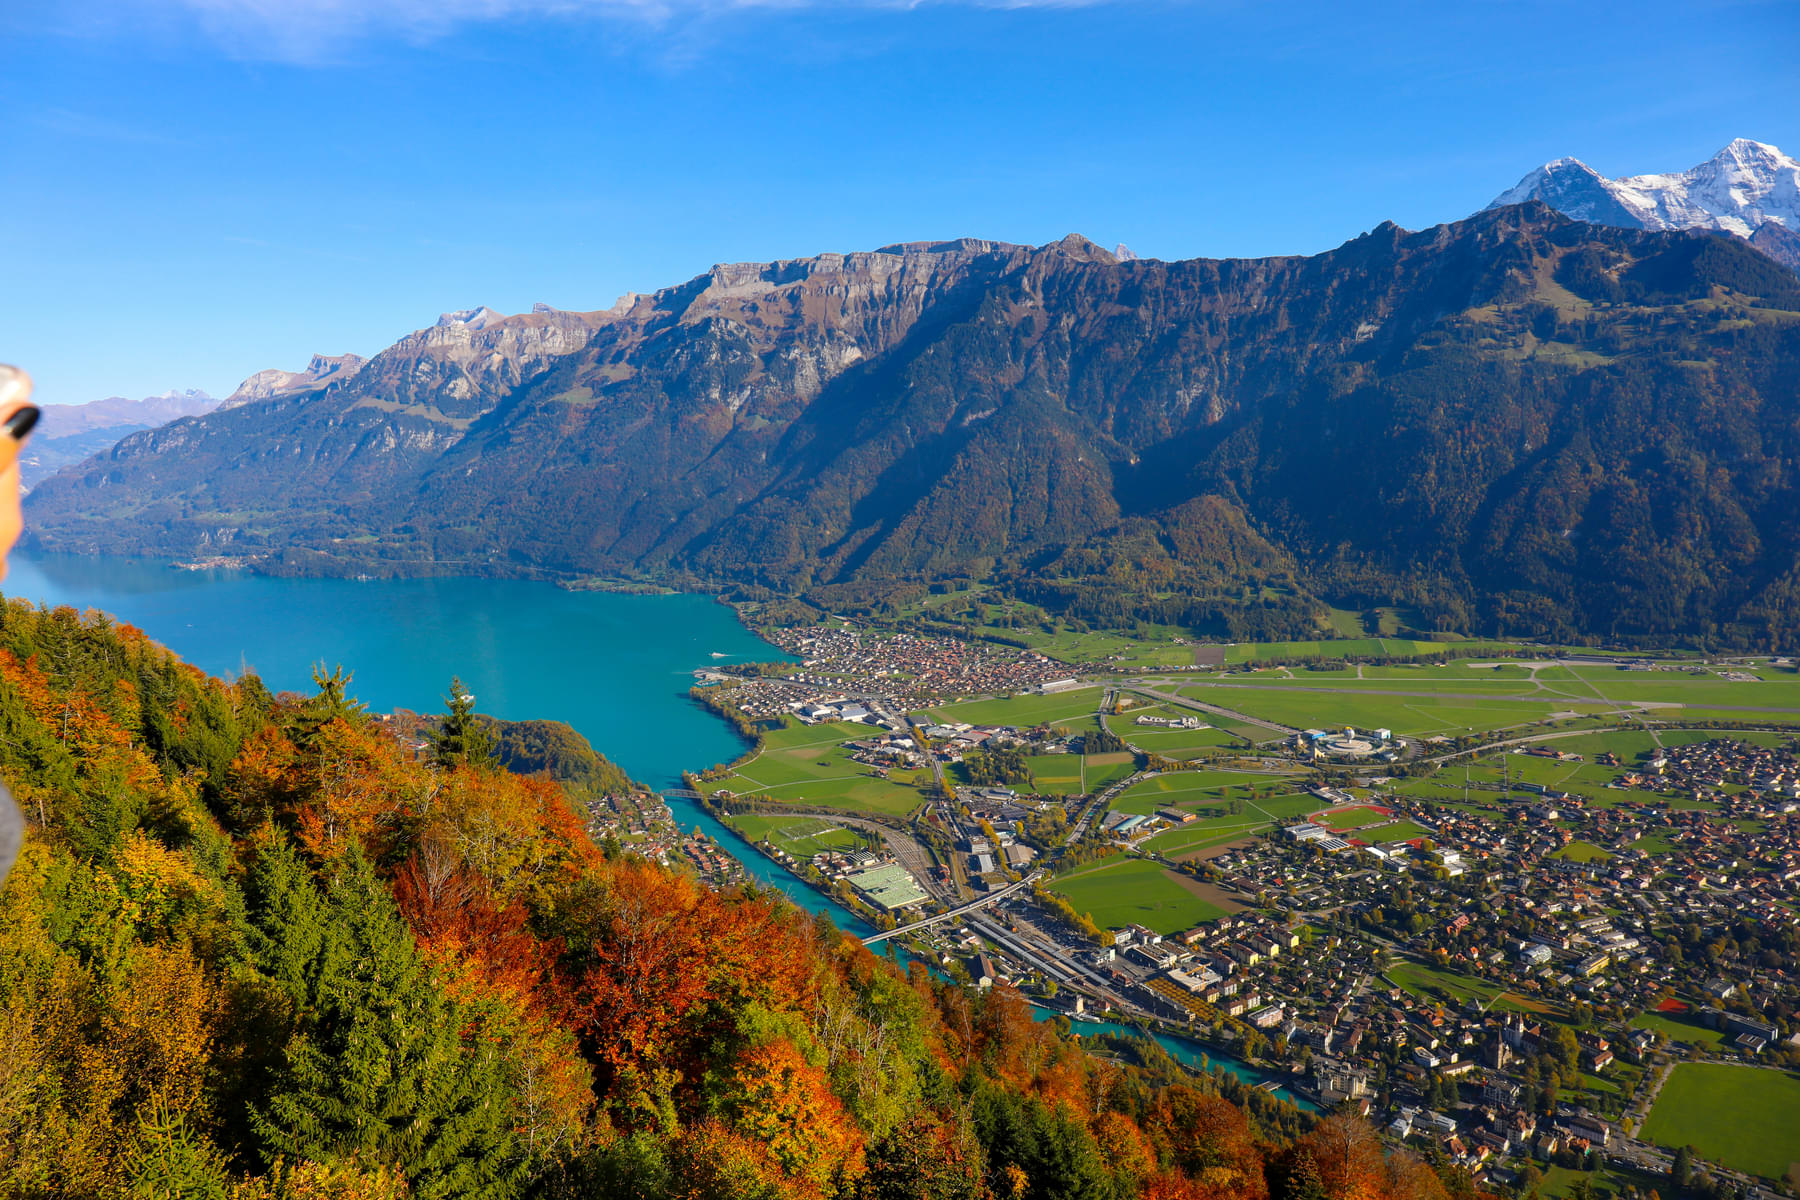 Get a panoramic view of the lush green landscape & sapphire-blue lakes - Brienz and Thun